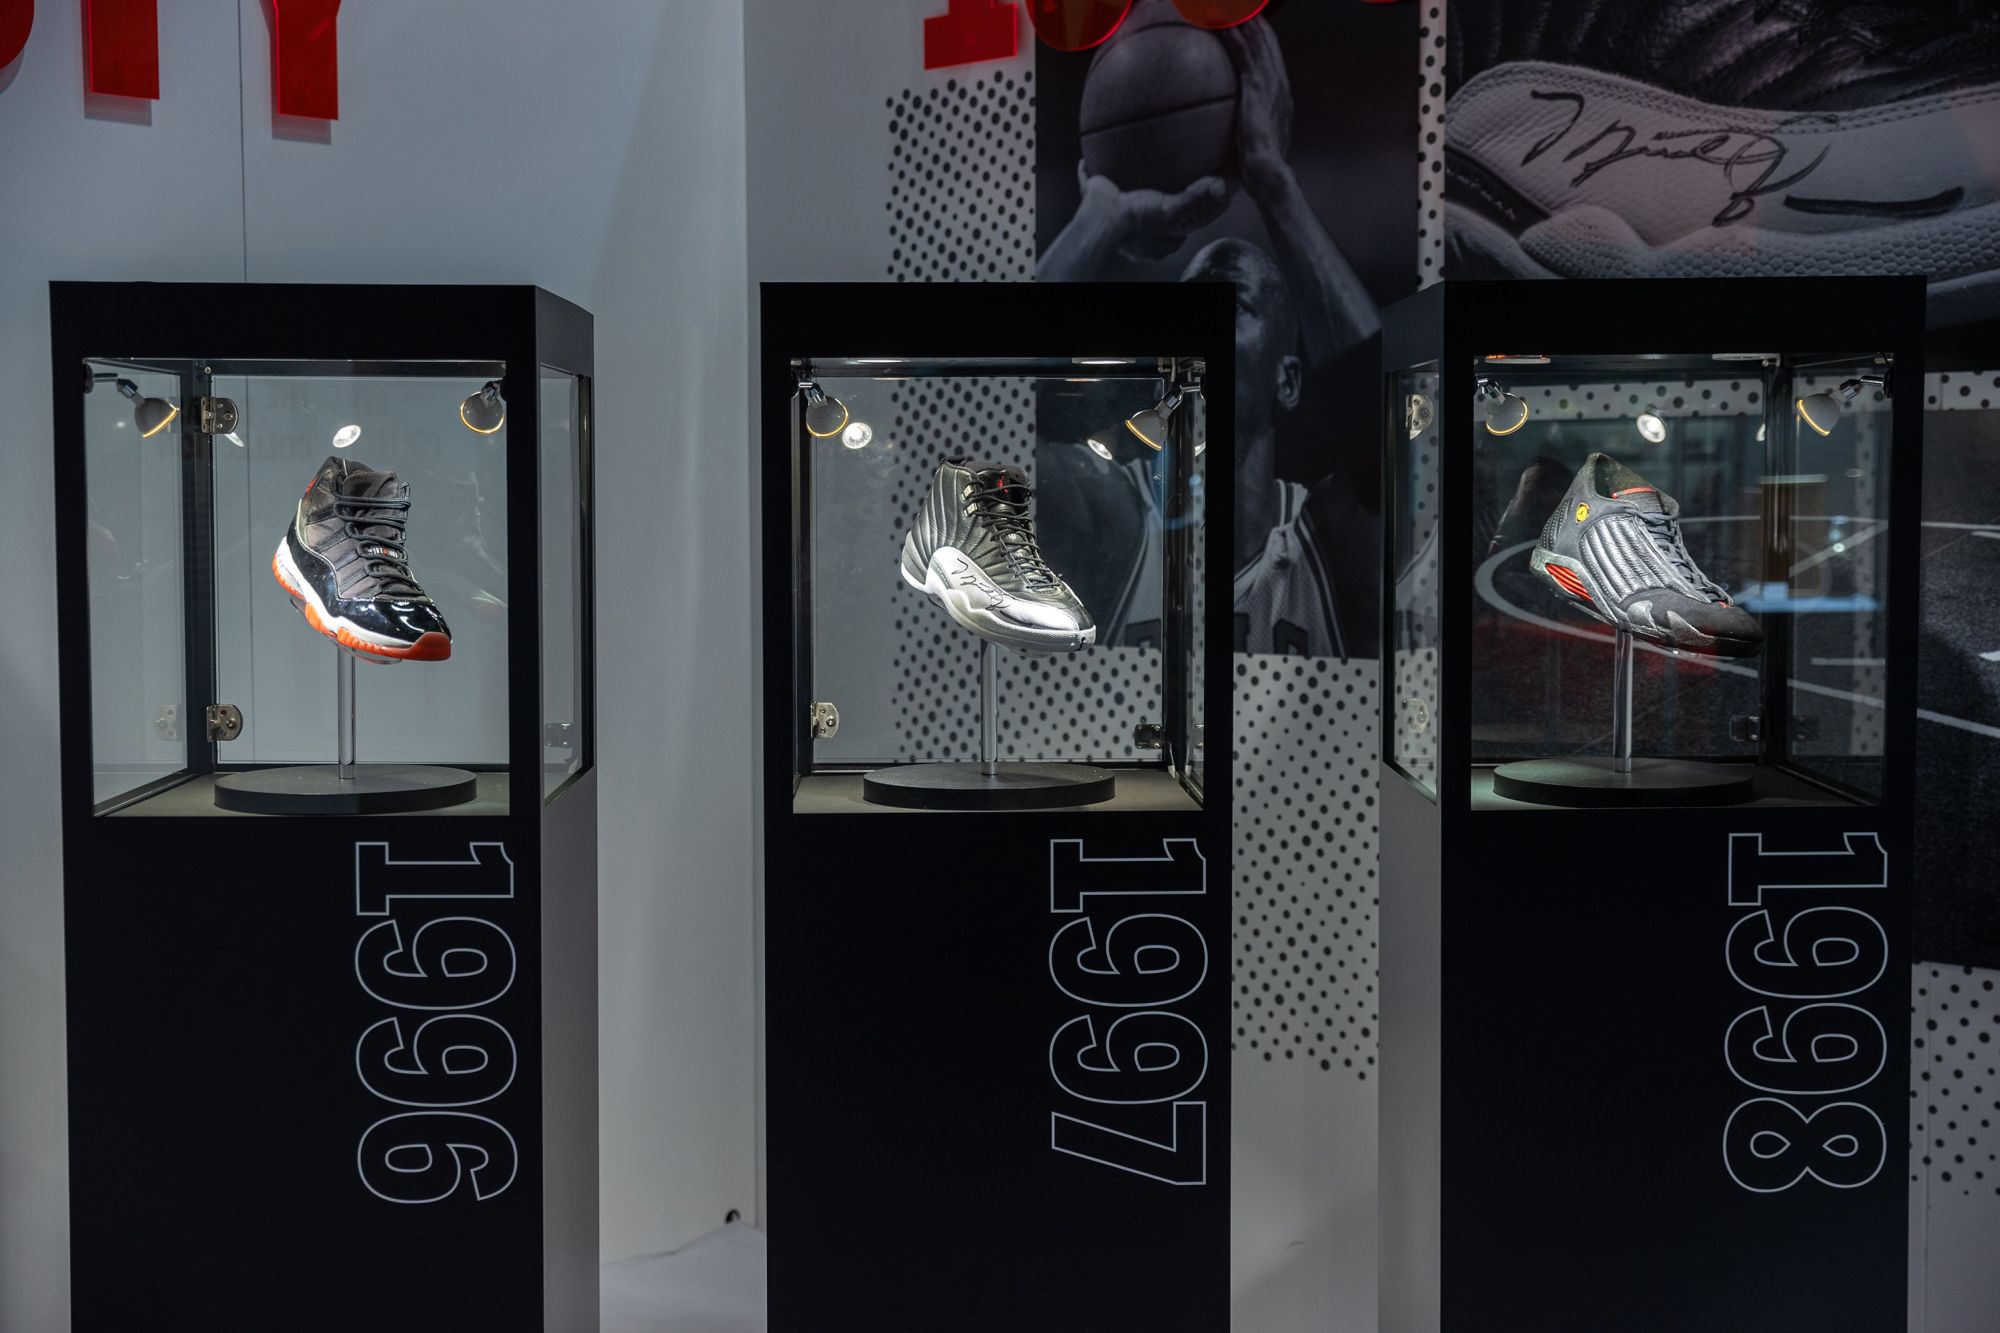 The complete set of former basketball player Michael Jordan's six "Air Jordan" championship sneakers on display during Sotheby's Spring Sales auction preview in Hong Kong, China, in April 2023.